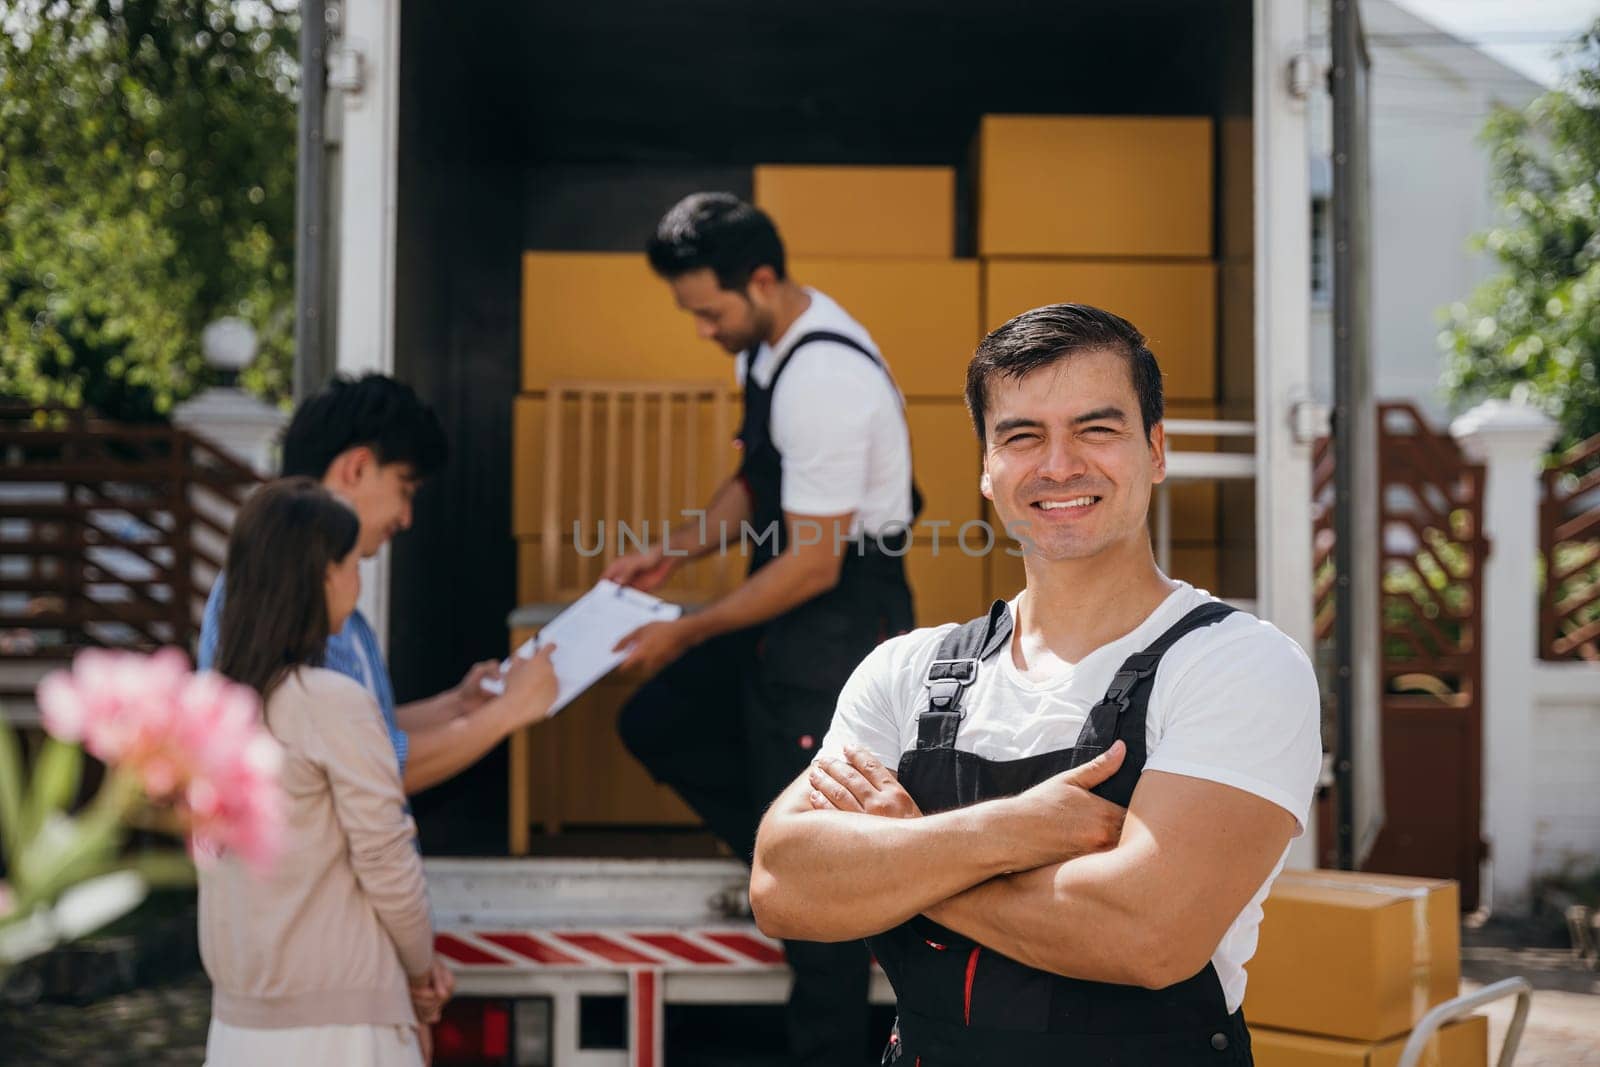 A portrait of a cheerful mover unloading boxes into a new home from a truck. These removal company workers ensure efficient moving spreading joy. Moving day concept by Sorapop